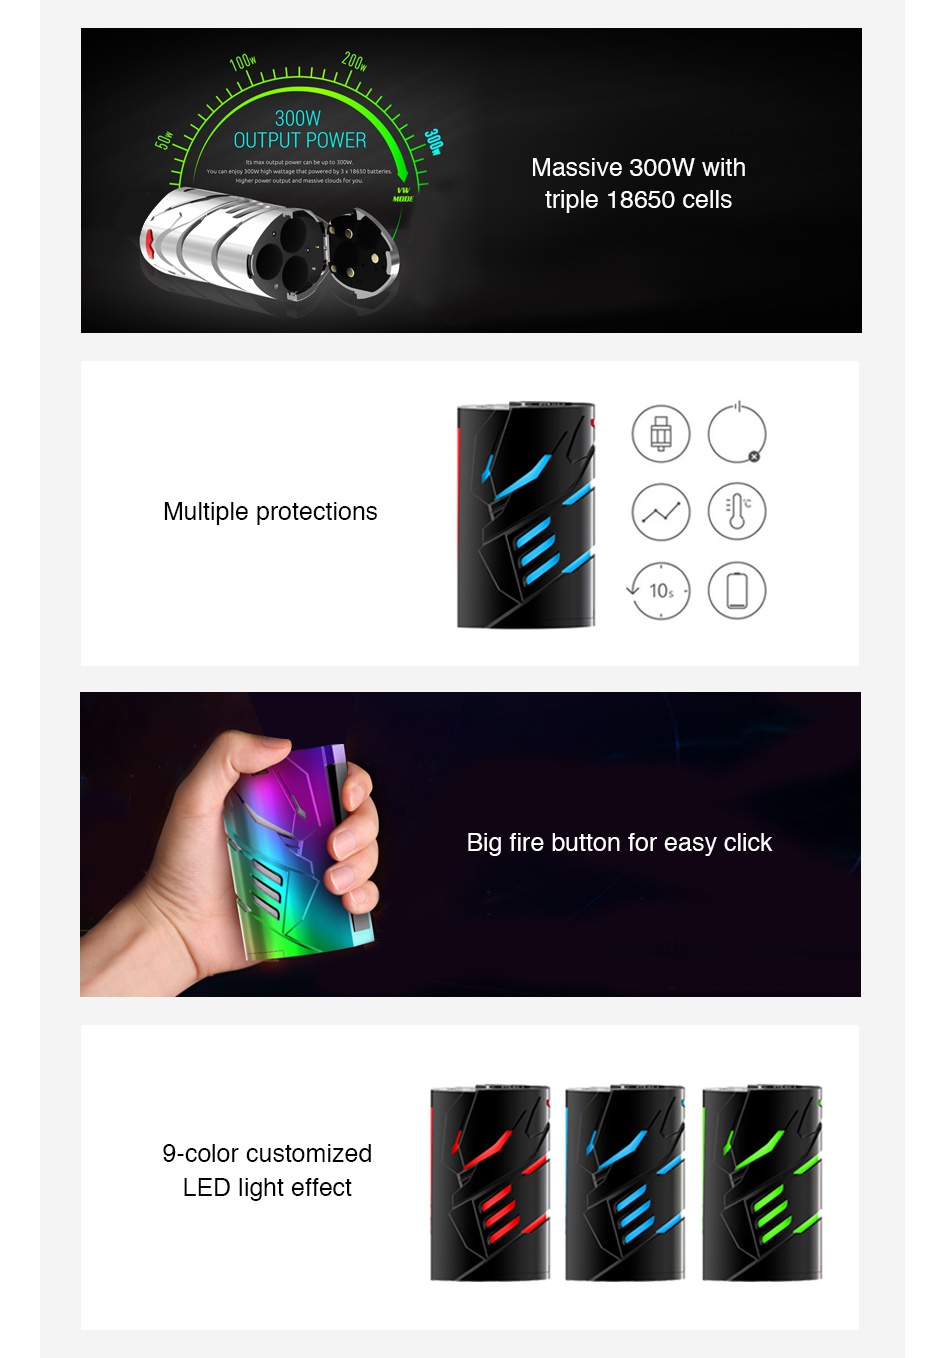 SMOK T-Priv 3 300W TC Box MOD 300W OUTPUT POWER Massive 300W with triple 18650 cells Multiple protections Big fire button for easy click 9 color customized ED light effect